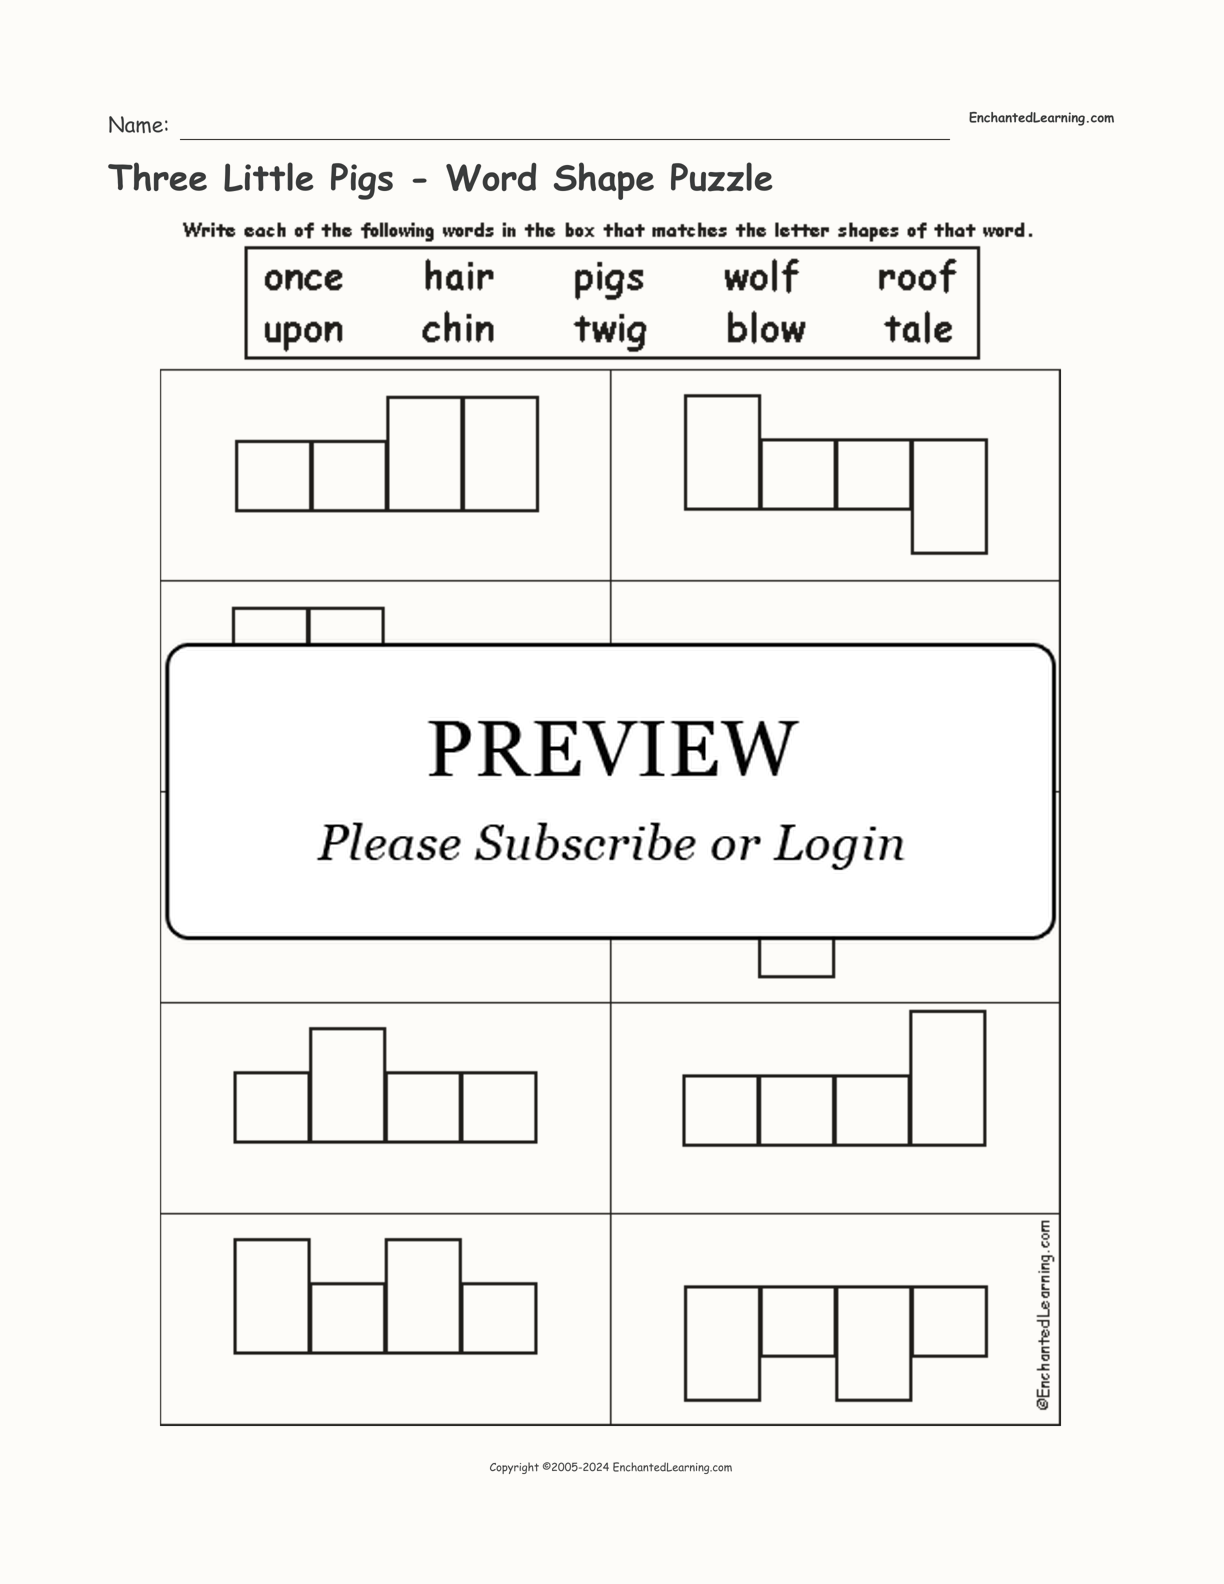 Three Little Pigs - Word Shape Puzzle interactive worksheet page 1